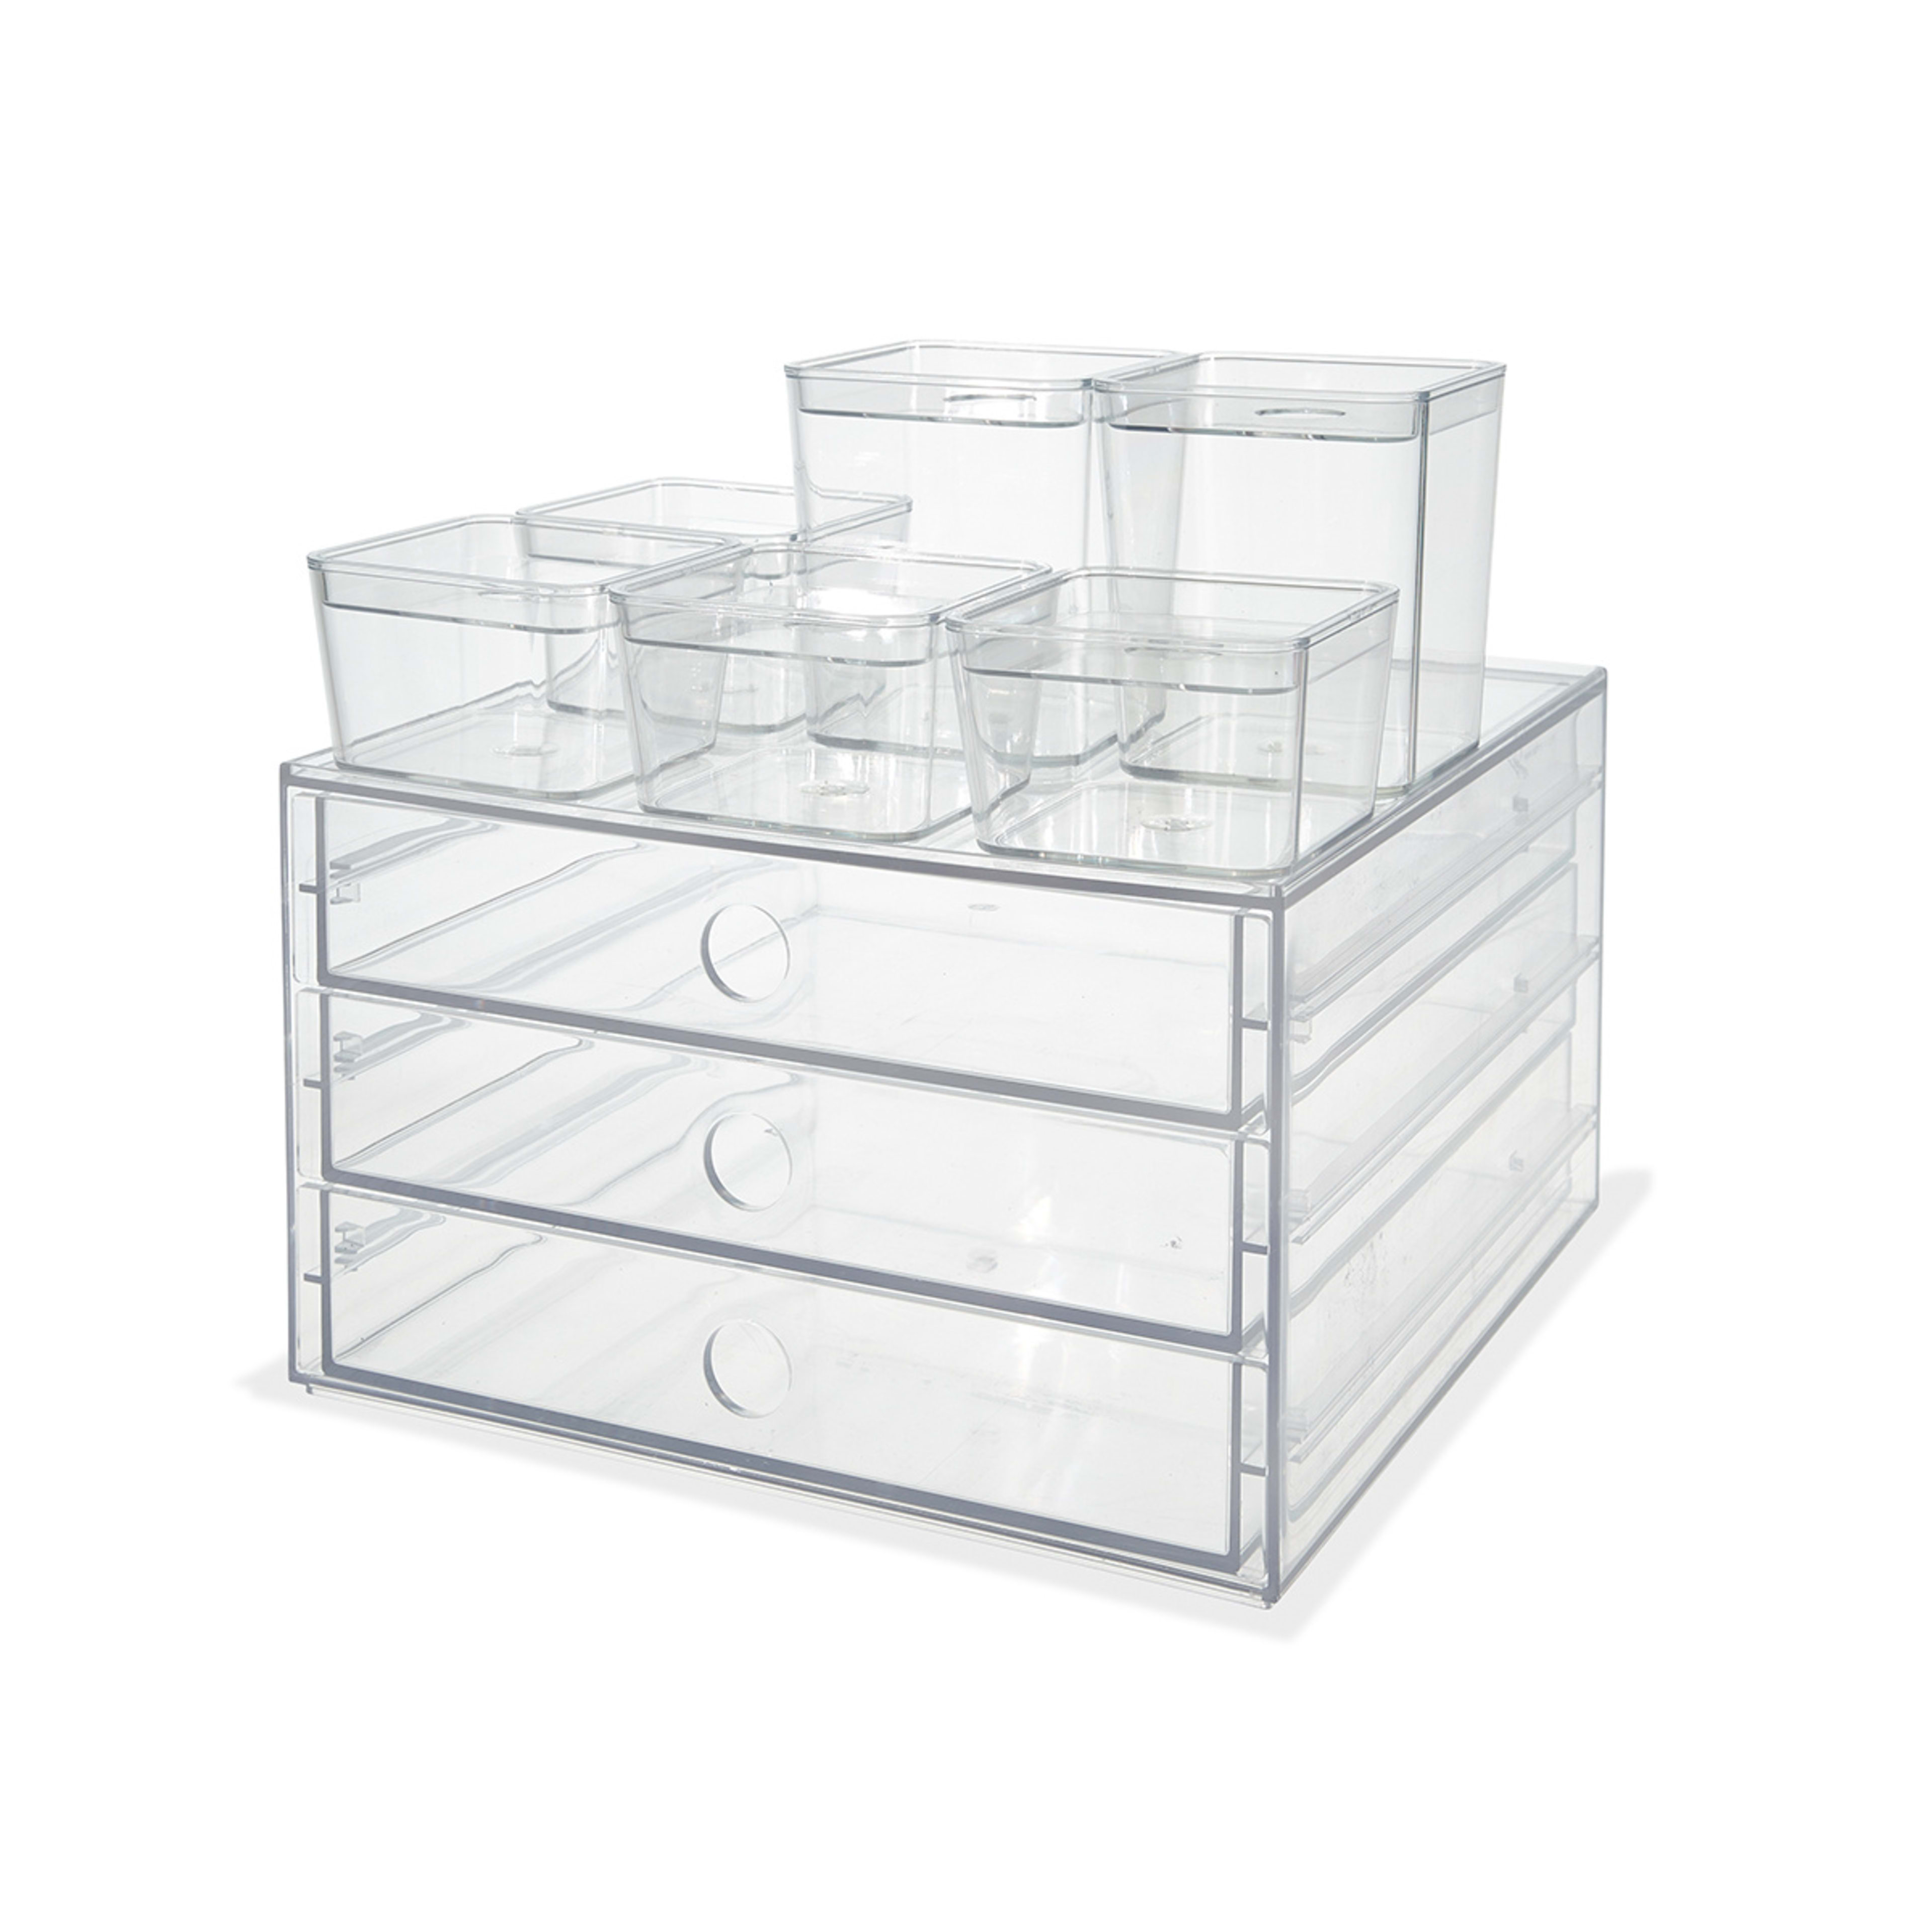 Set of 6 Clear Organisers with Lids - Kmart